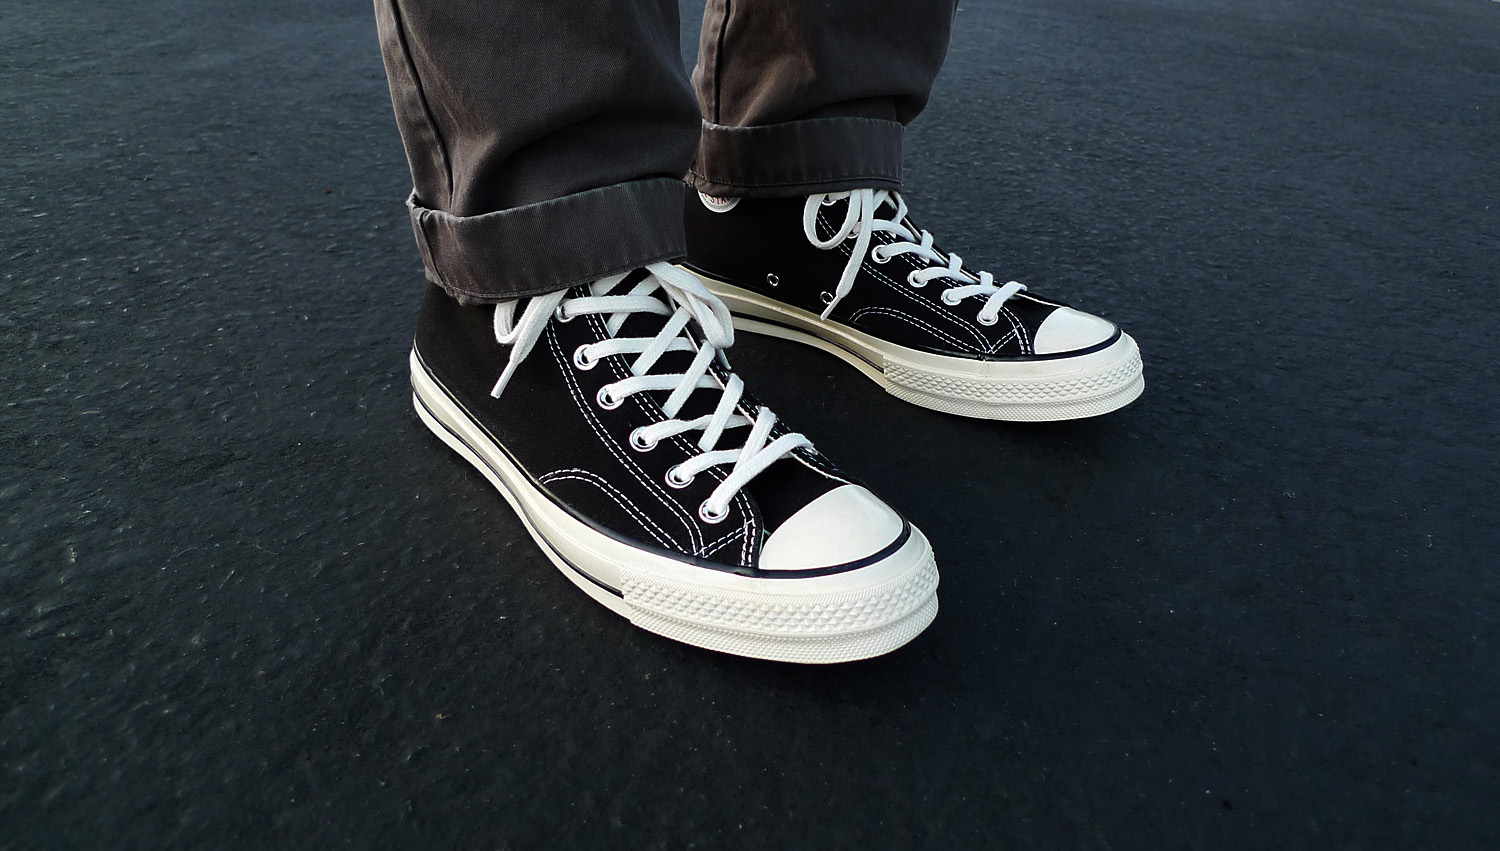 Converse First String Standards 1970s Chuck Taylor All Star | Sole Collector